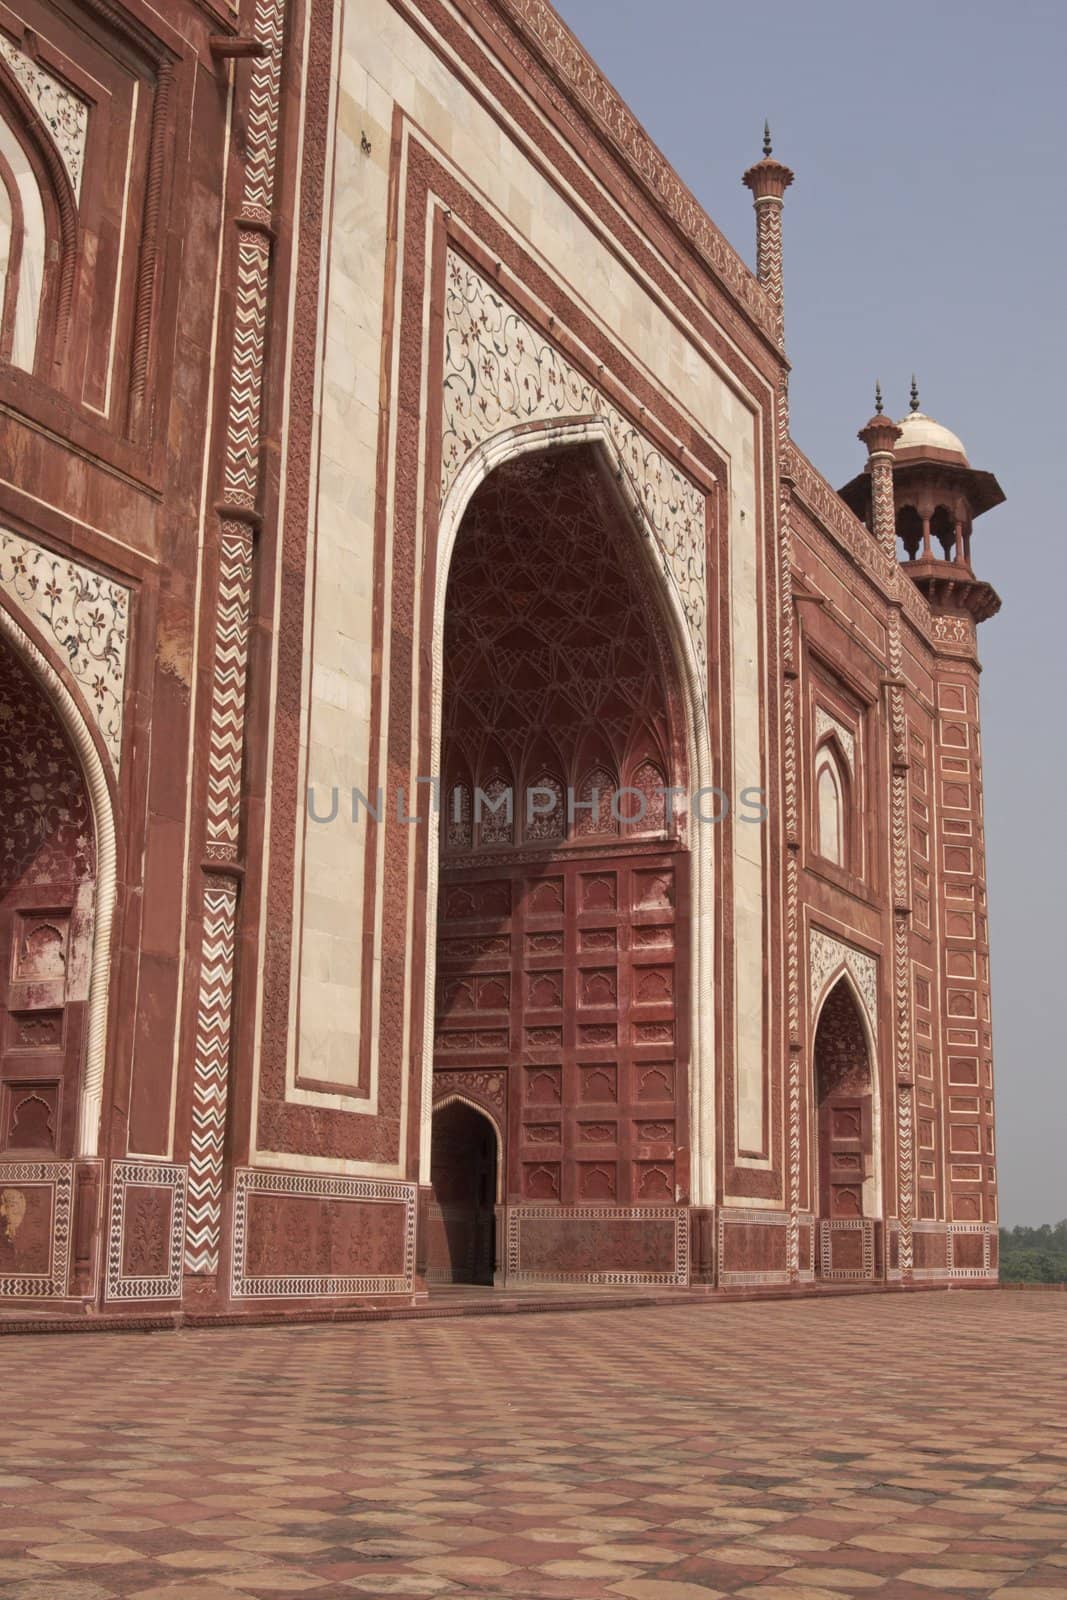 Mosque at the Taj Mahal. Mughal style building of red sandstone inlaid with marble. Agra, Uttar Pradesh, India